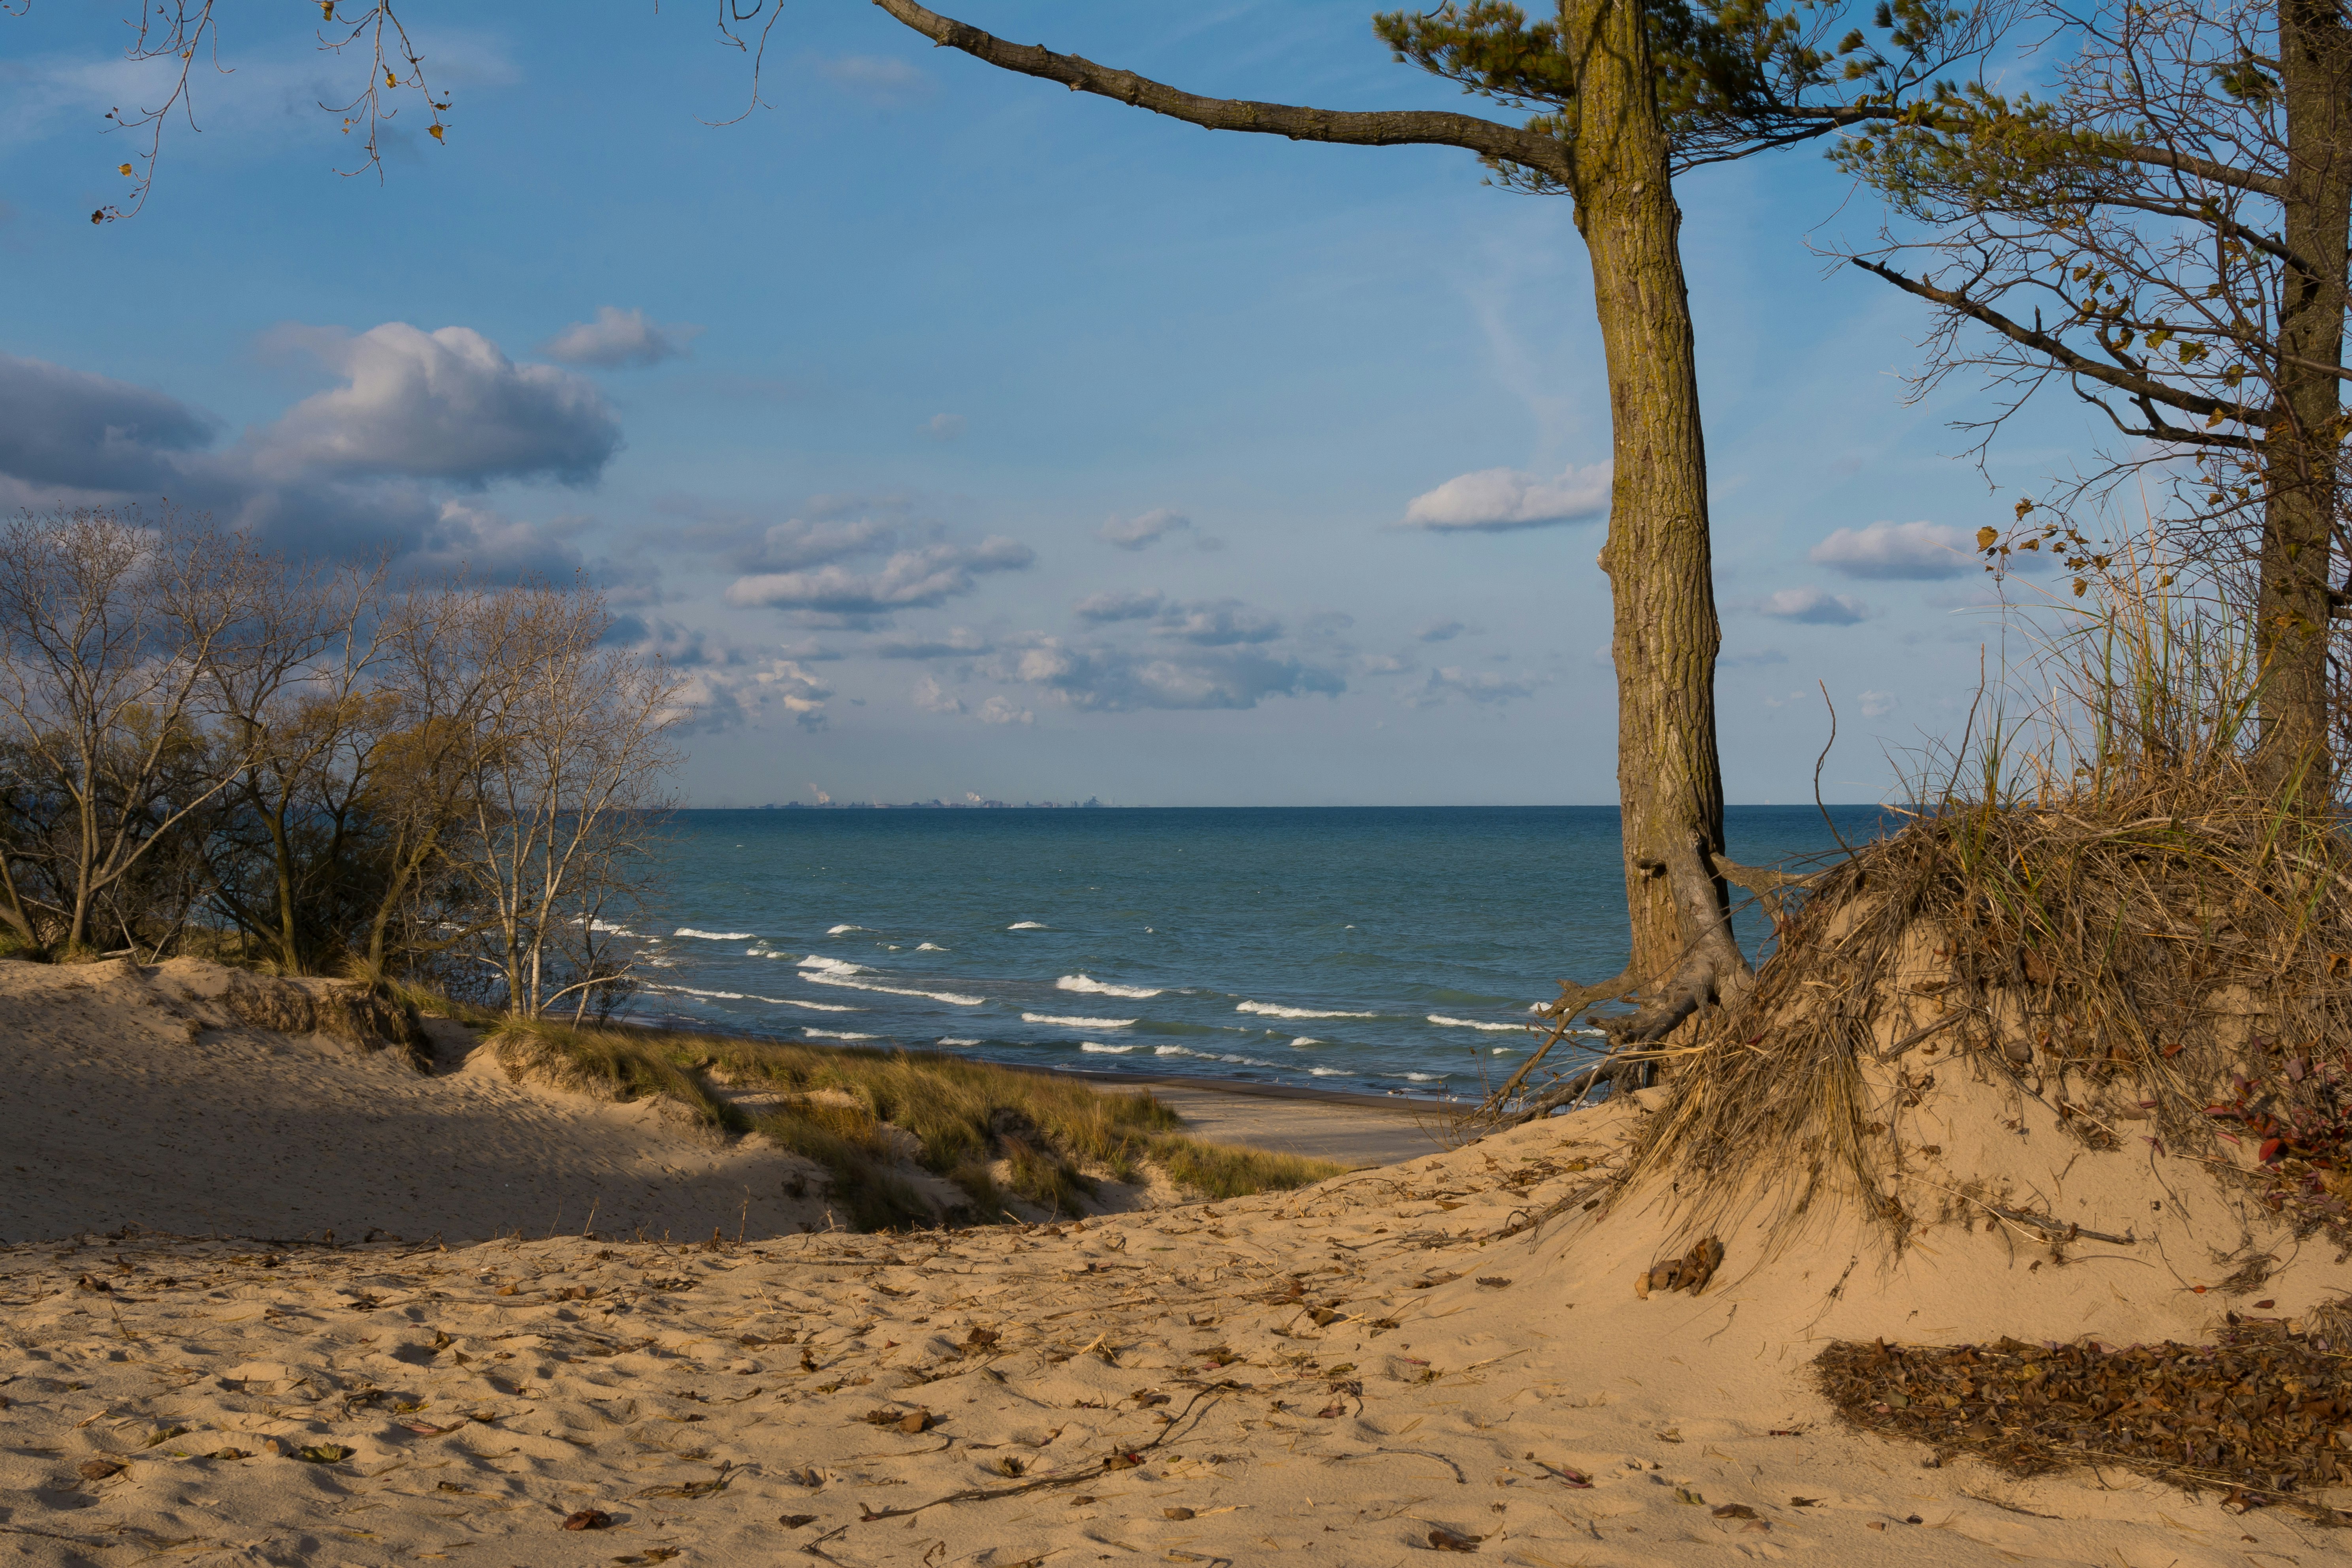 Small sand dunes punctuated by hardwood trees give way to the shoreline and bright blue waters in Indiana Dunes National Park